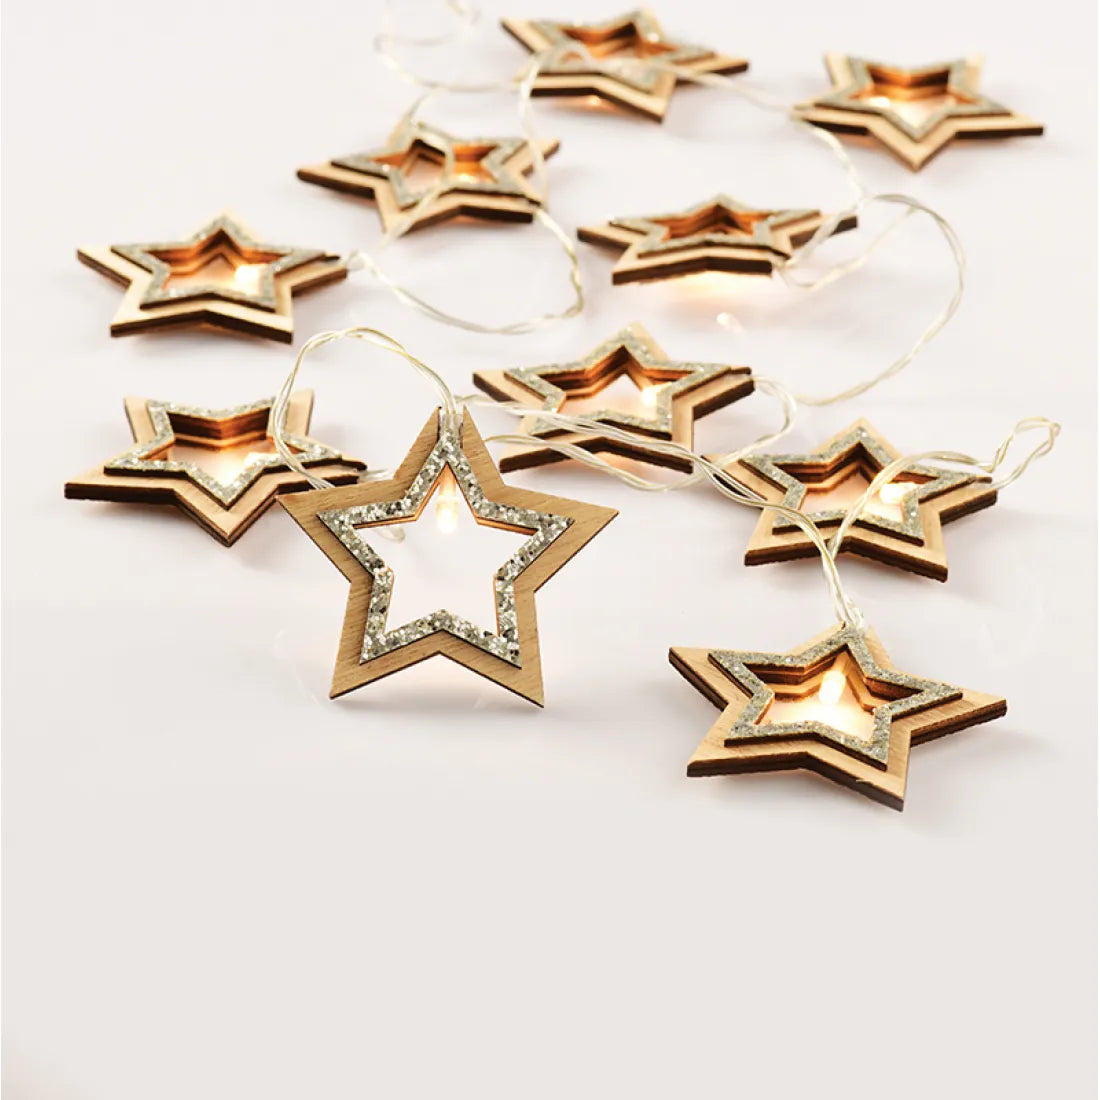 10LED ΛΑΜΠΑΚΙΑ ΜΠΑΤΑΡΙΑΣ SILVER GLITTER WOODEN STAR 1.35M ΘΕΡΜΟ